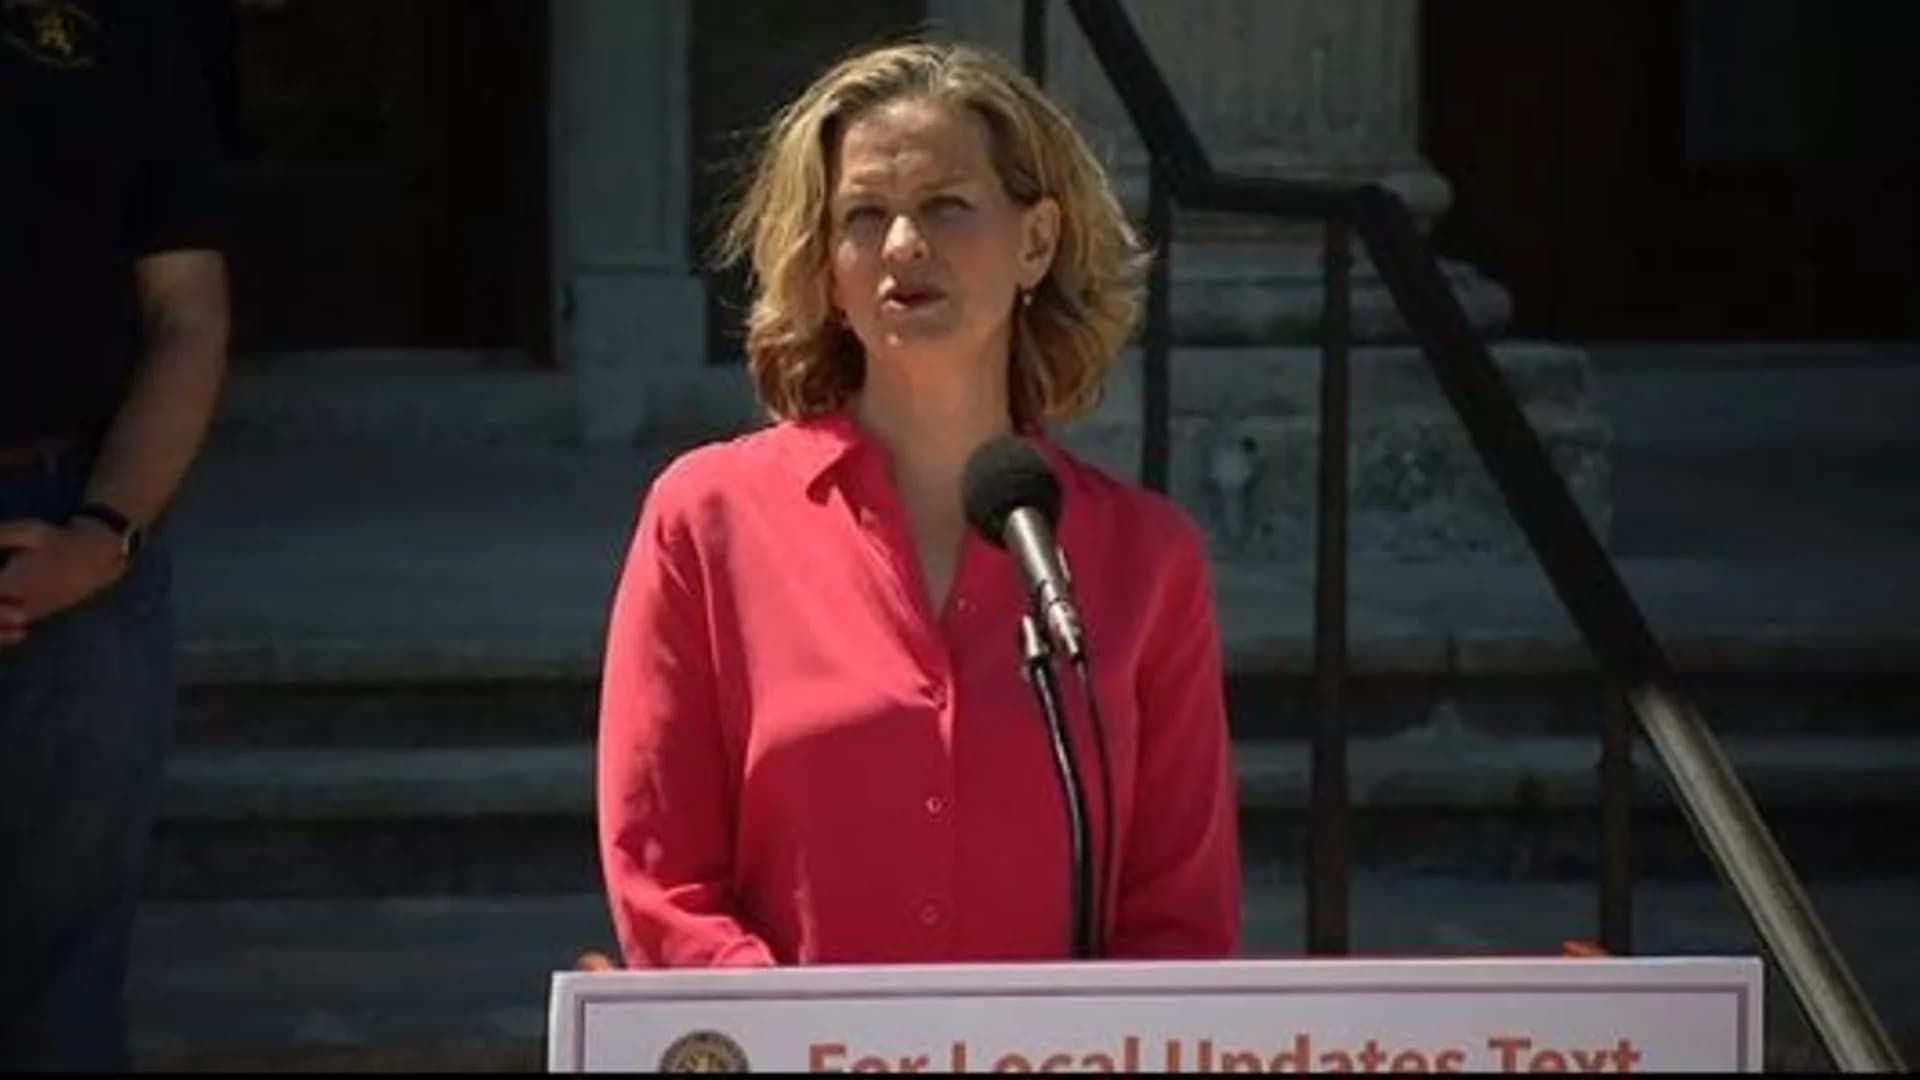 Nassau County Executive Laura Curran is giving an update on the aftermath of Isaias - LIVE VIDEO